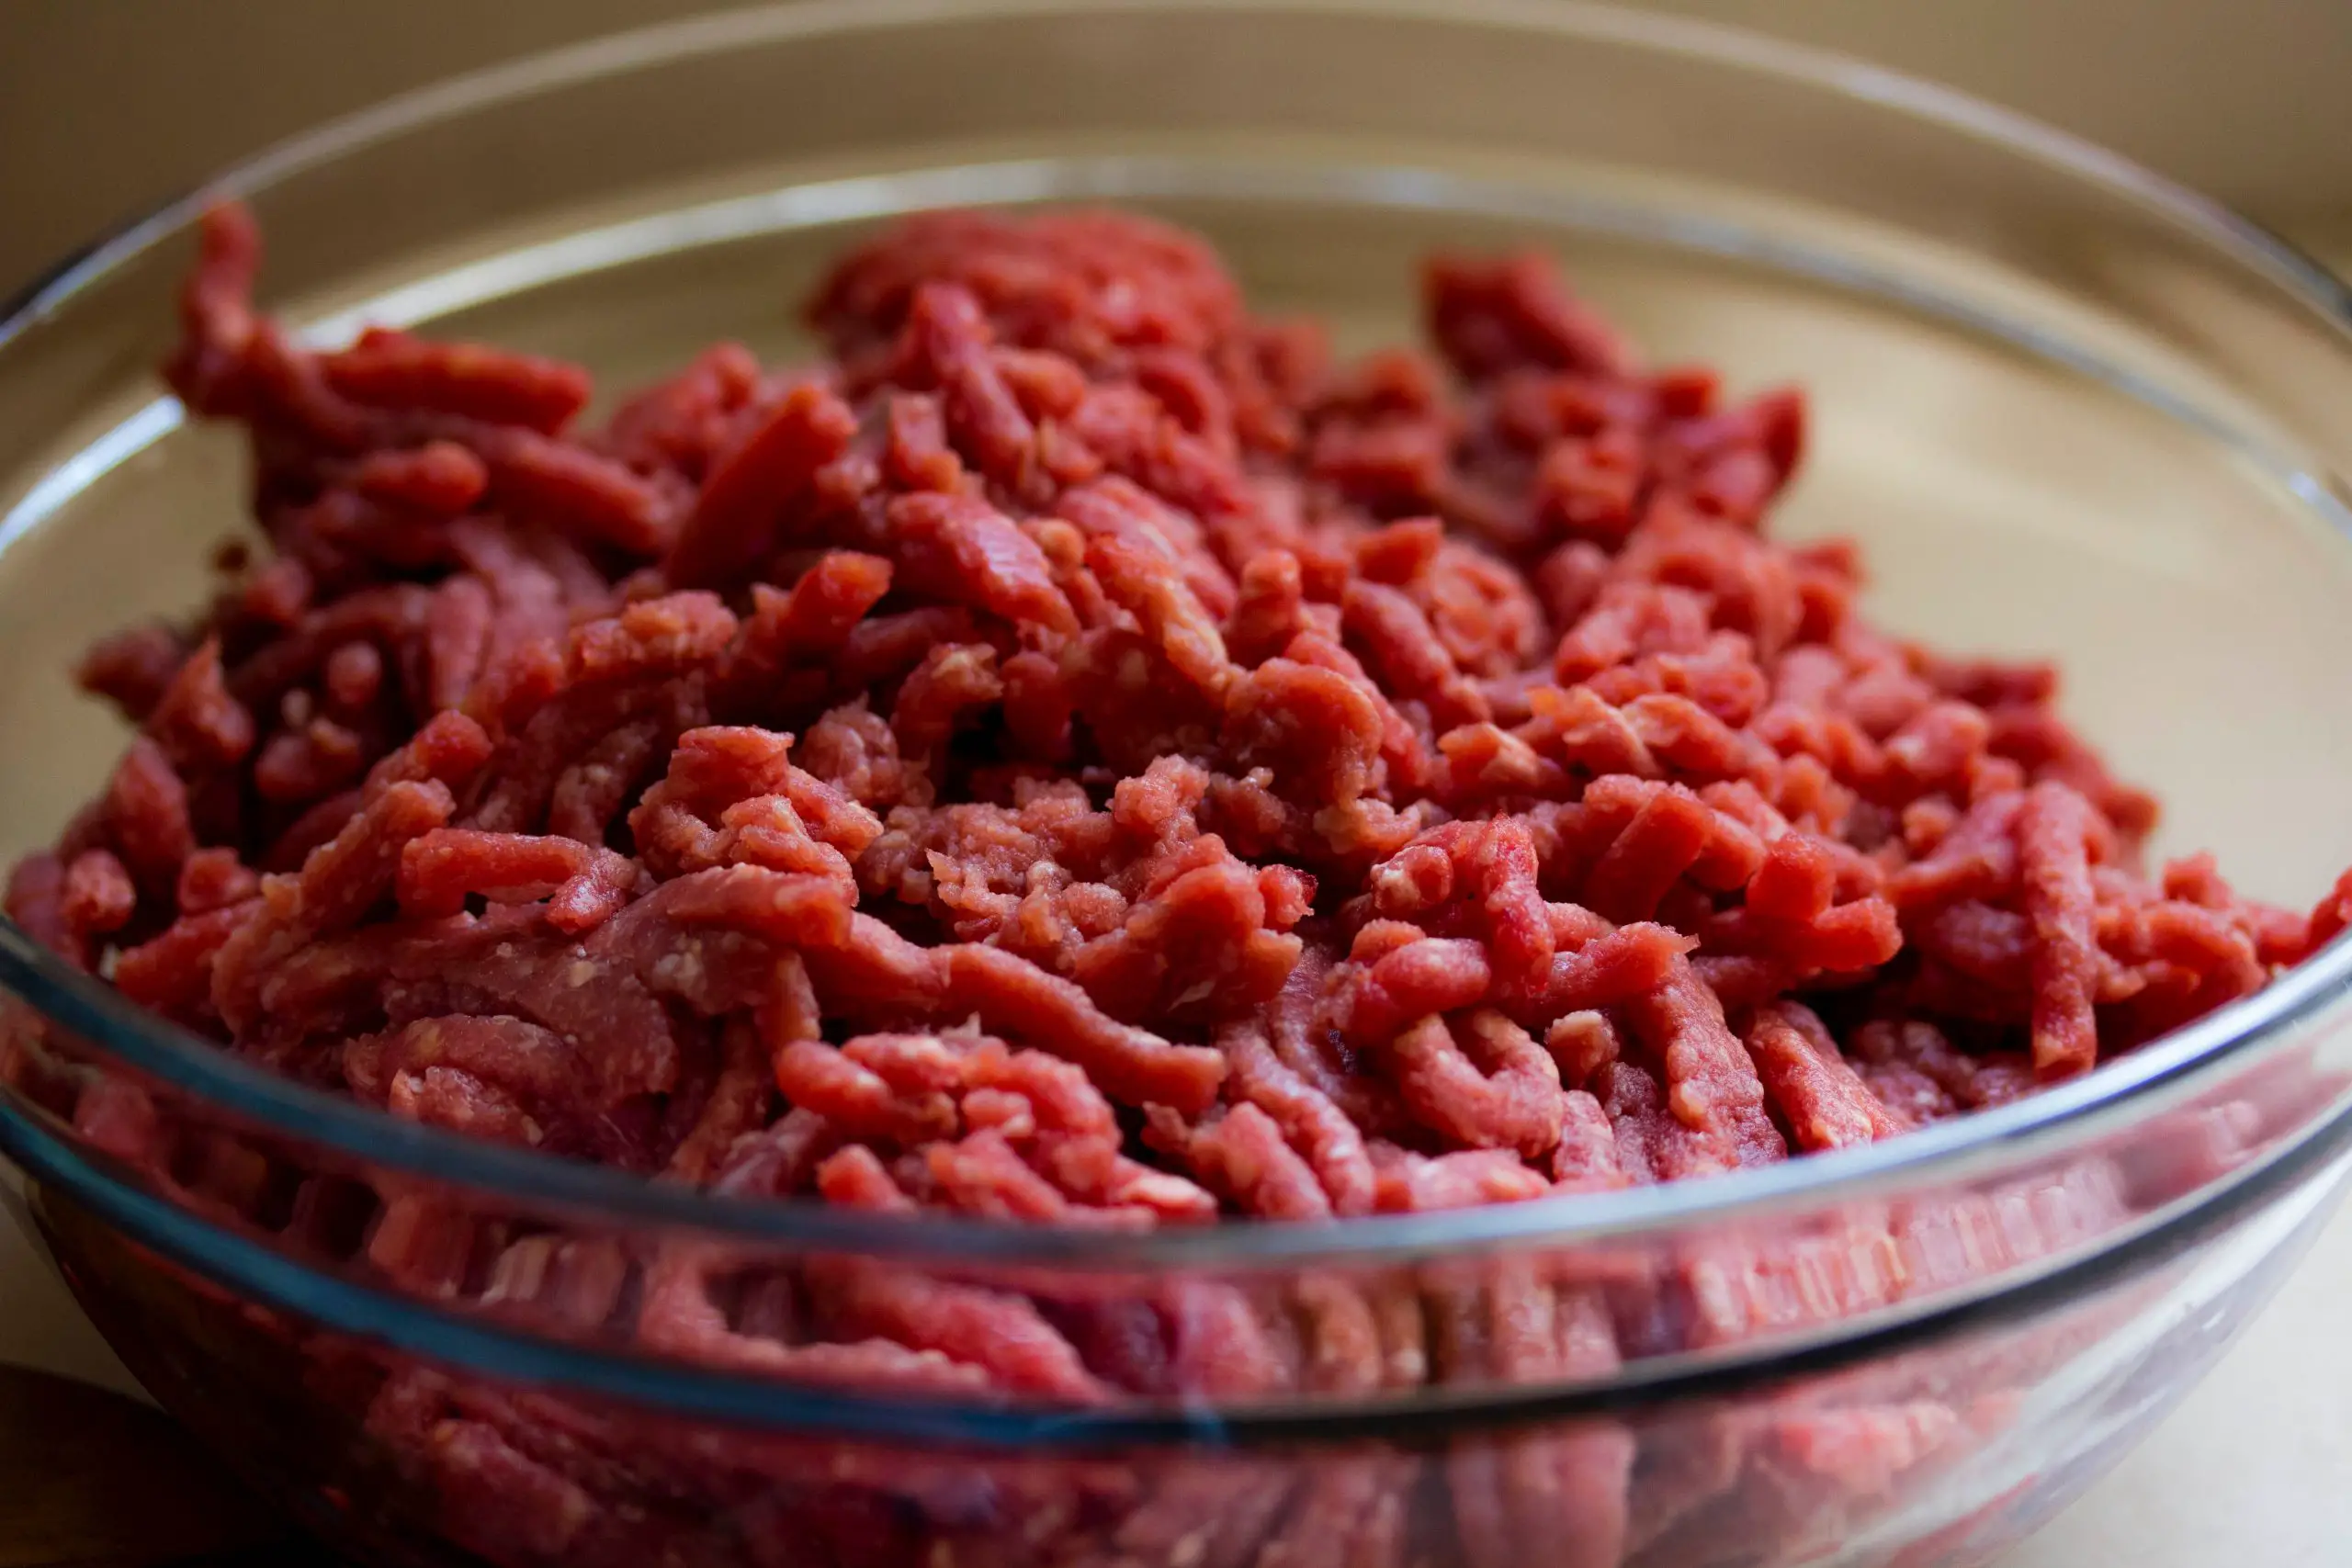 Ground beef in a small glass bowl